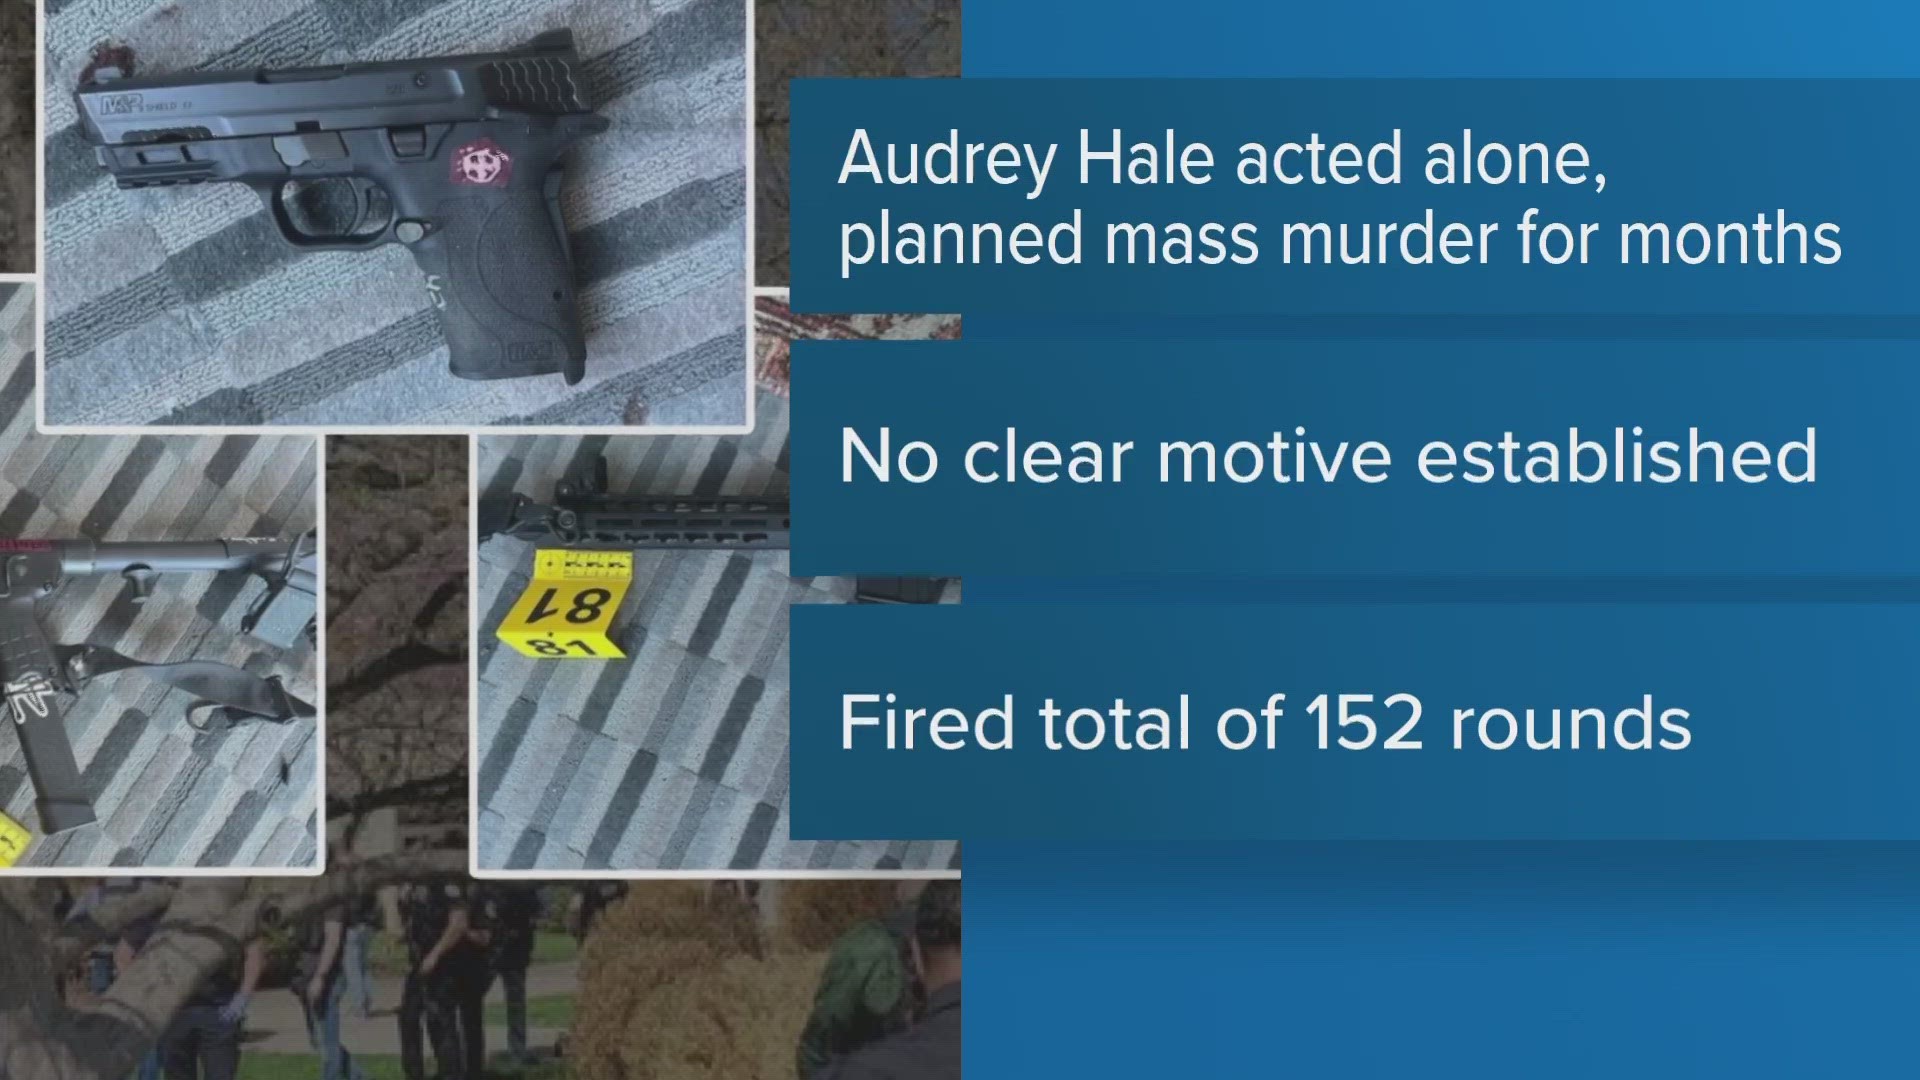 MNPD said its investigation showed Audrey Hale "acted totally alone" and planned "over a period of months to commit mass murder at The Covenant School."